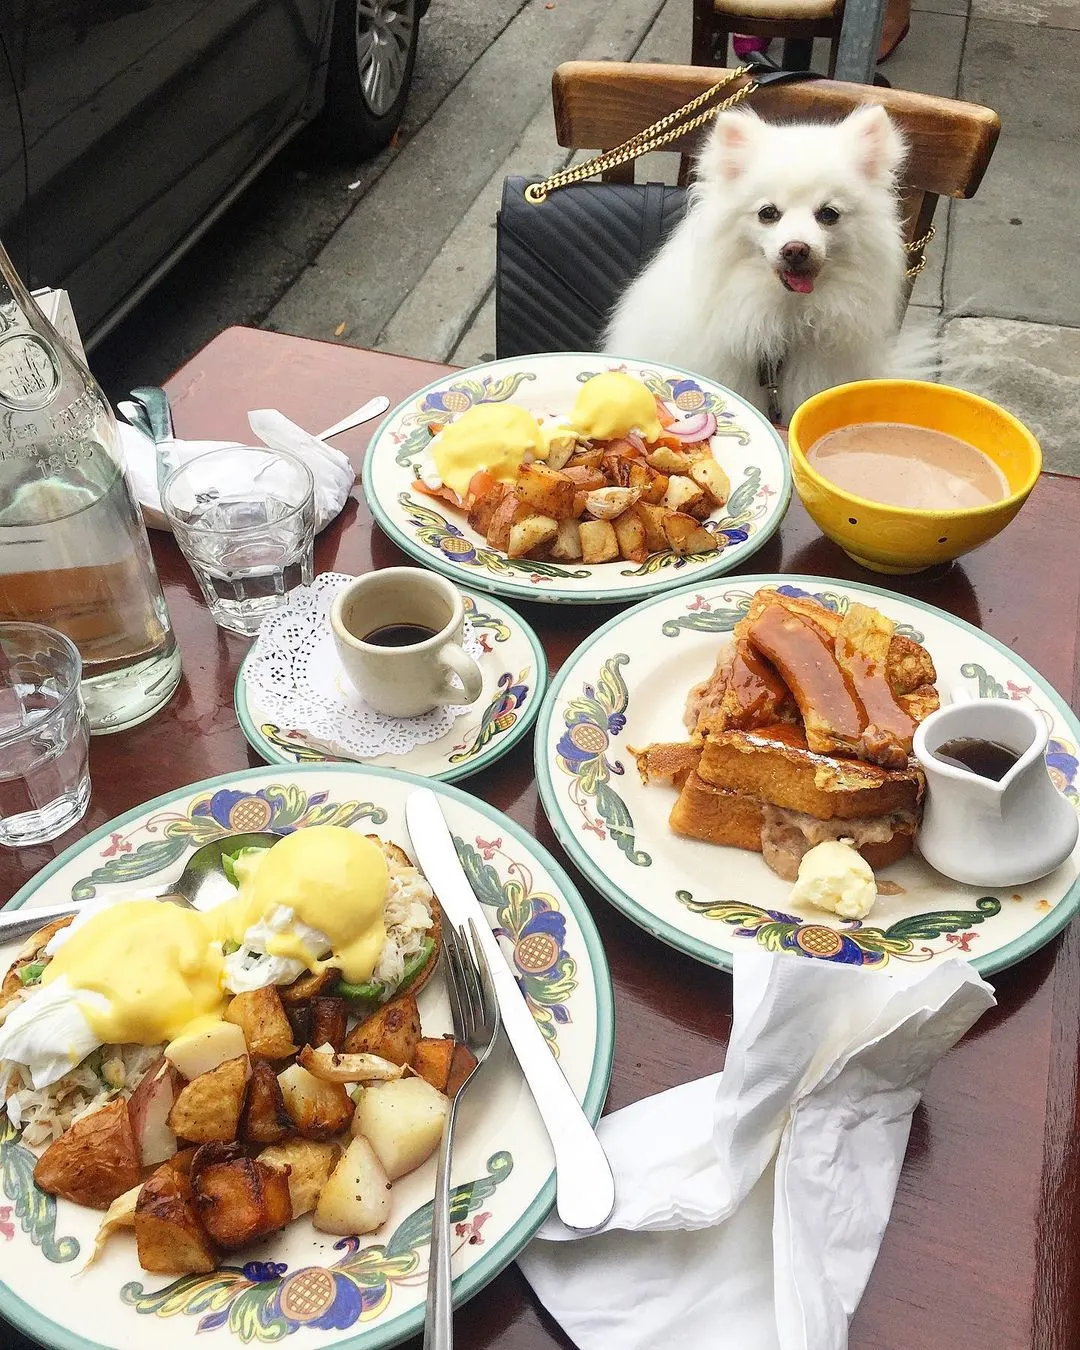 Small dog at brunch table full of food